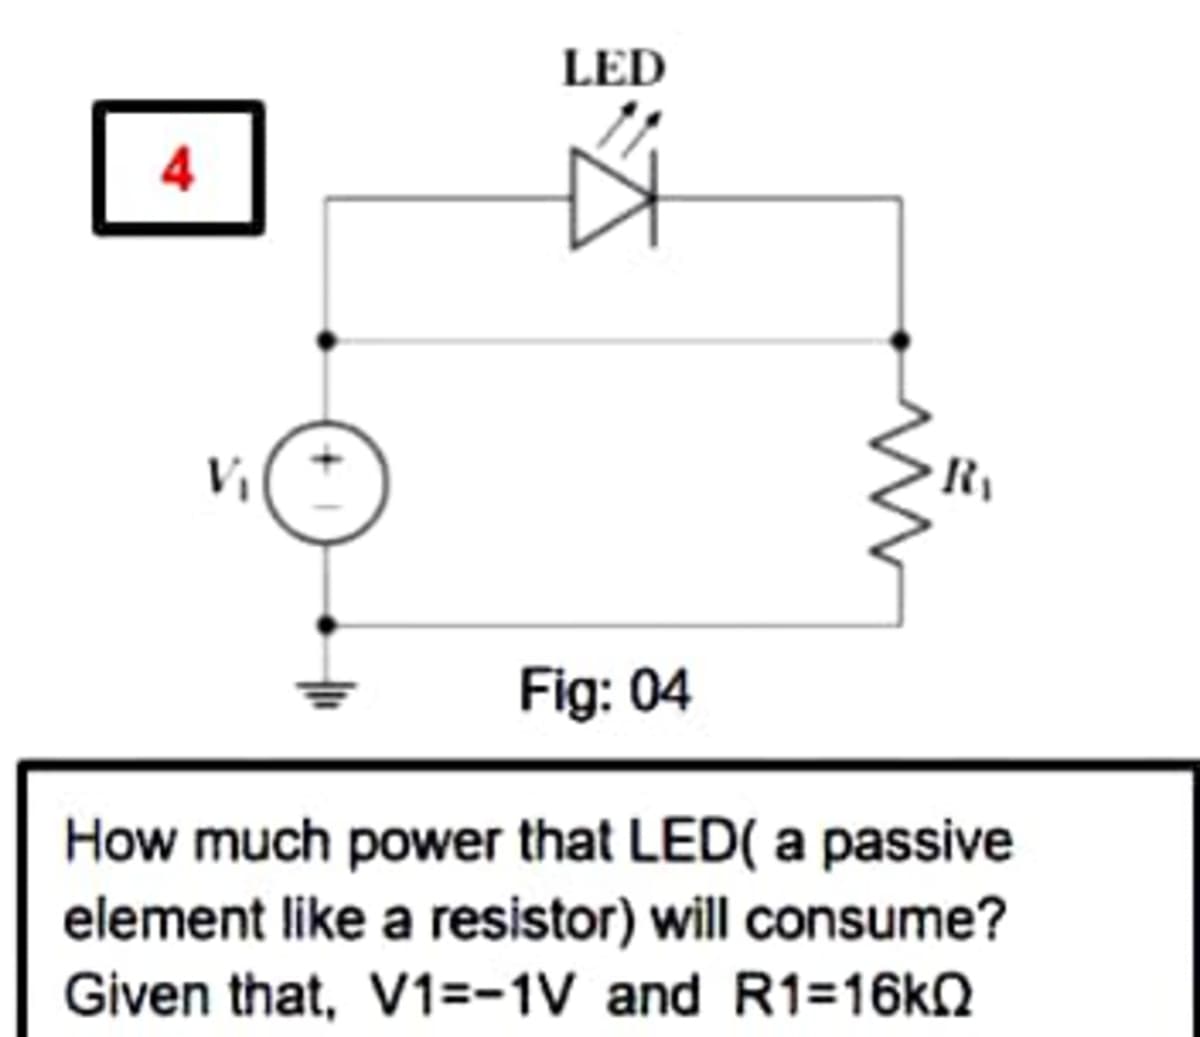 LED
4
Fig: 04
How much power that LED( a passive
element like a resistor) will consume?
Given that, V1=-1V and R1=16kN
